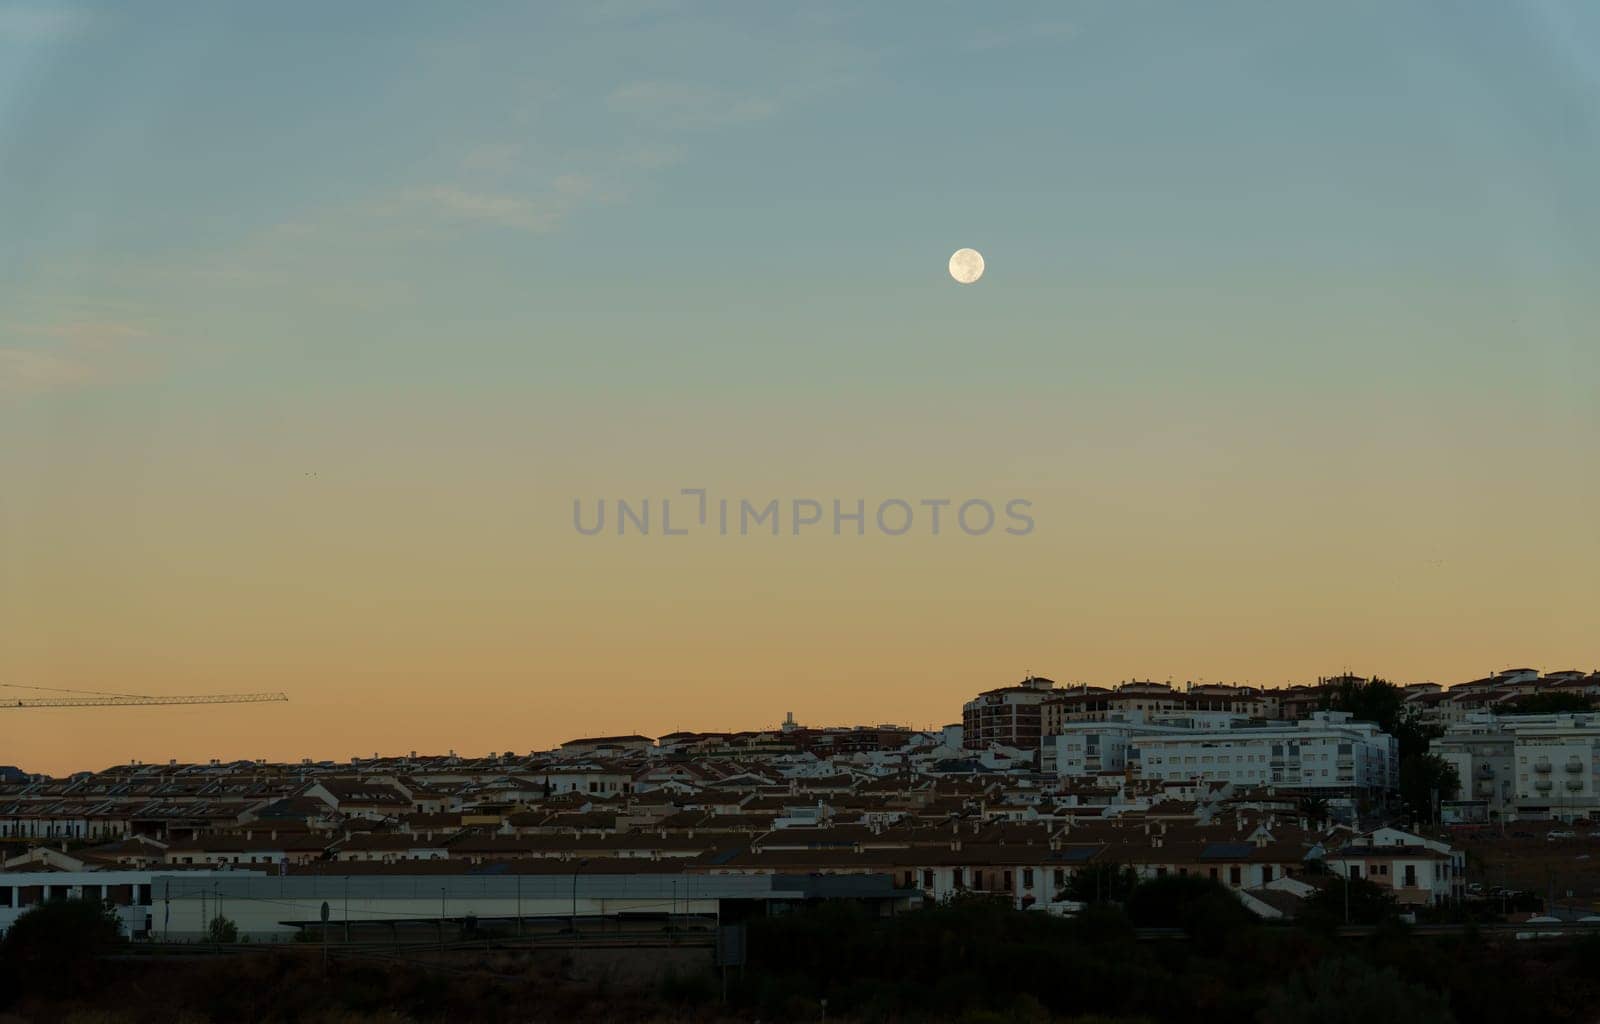 sunrise in the city with reddish and blue tones with the full moon in the sky. by joseantona